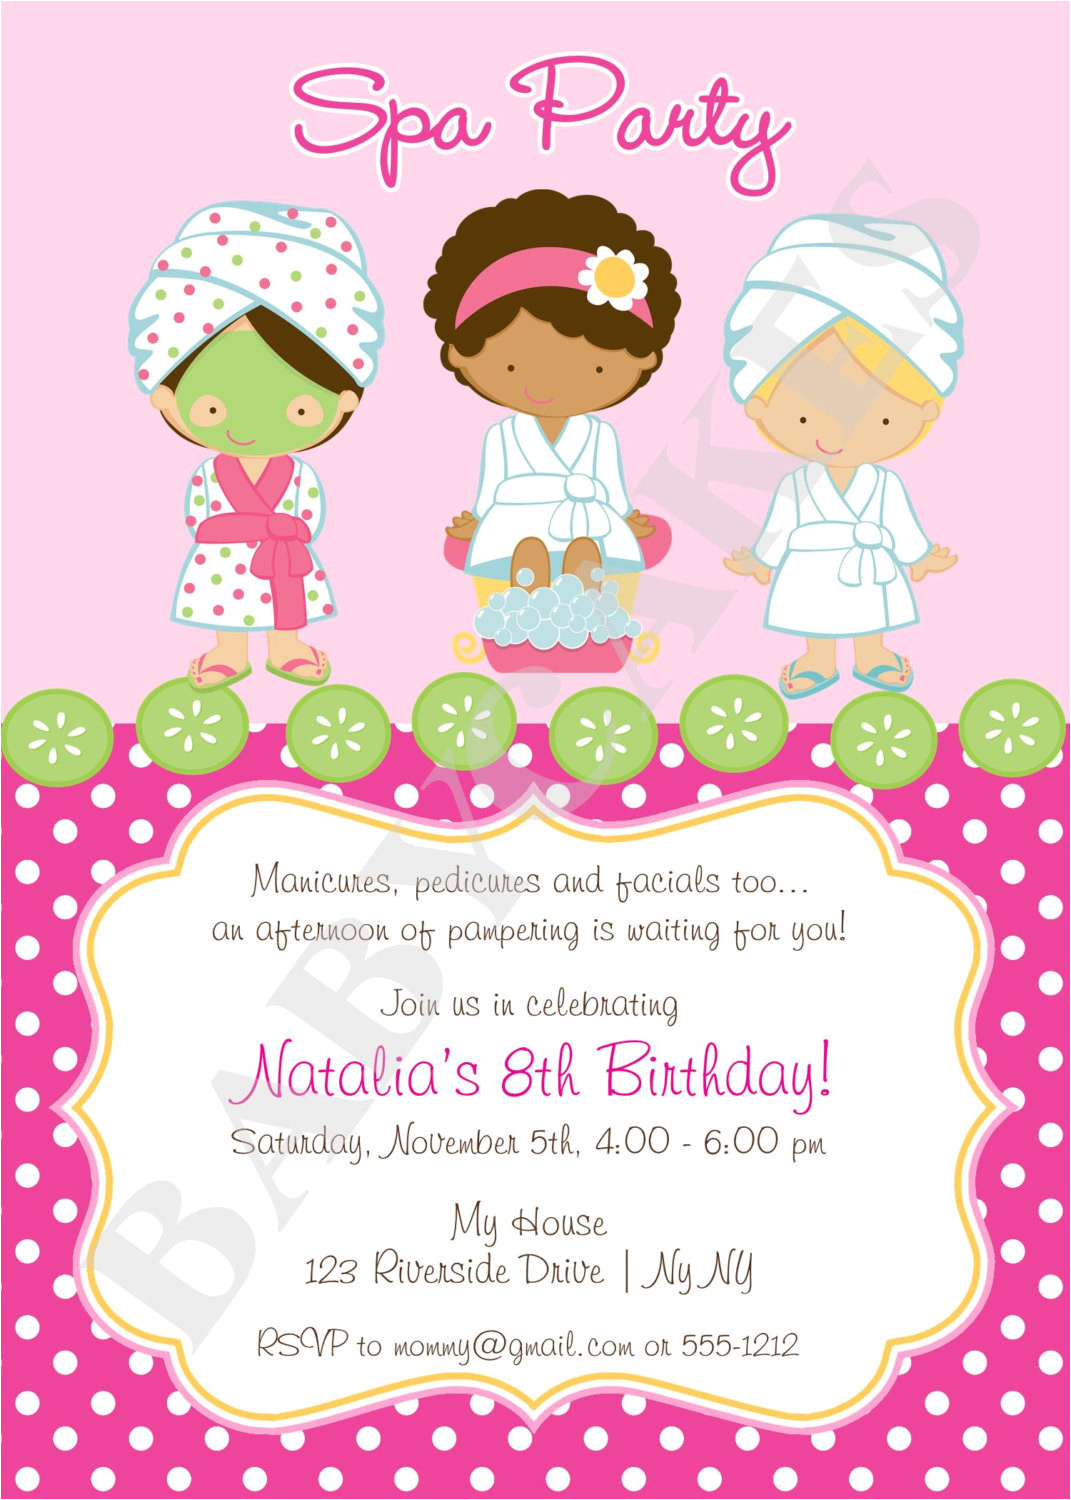 spa party invitation diy print your own